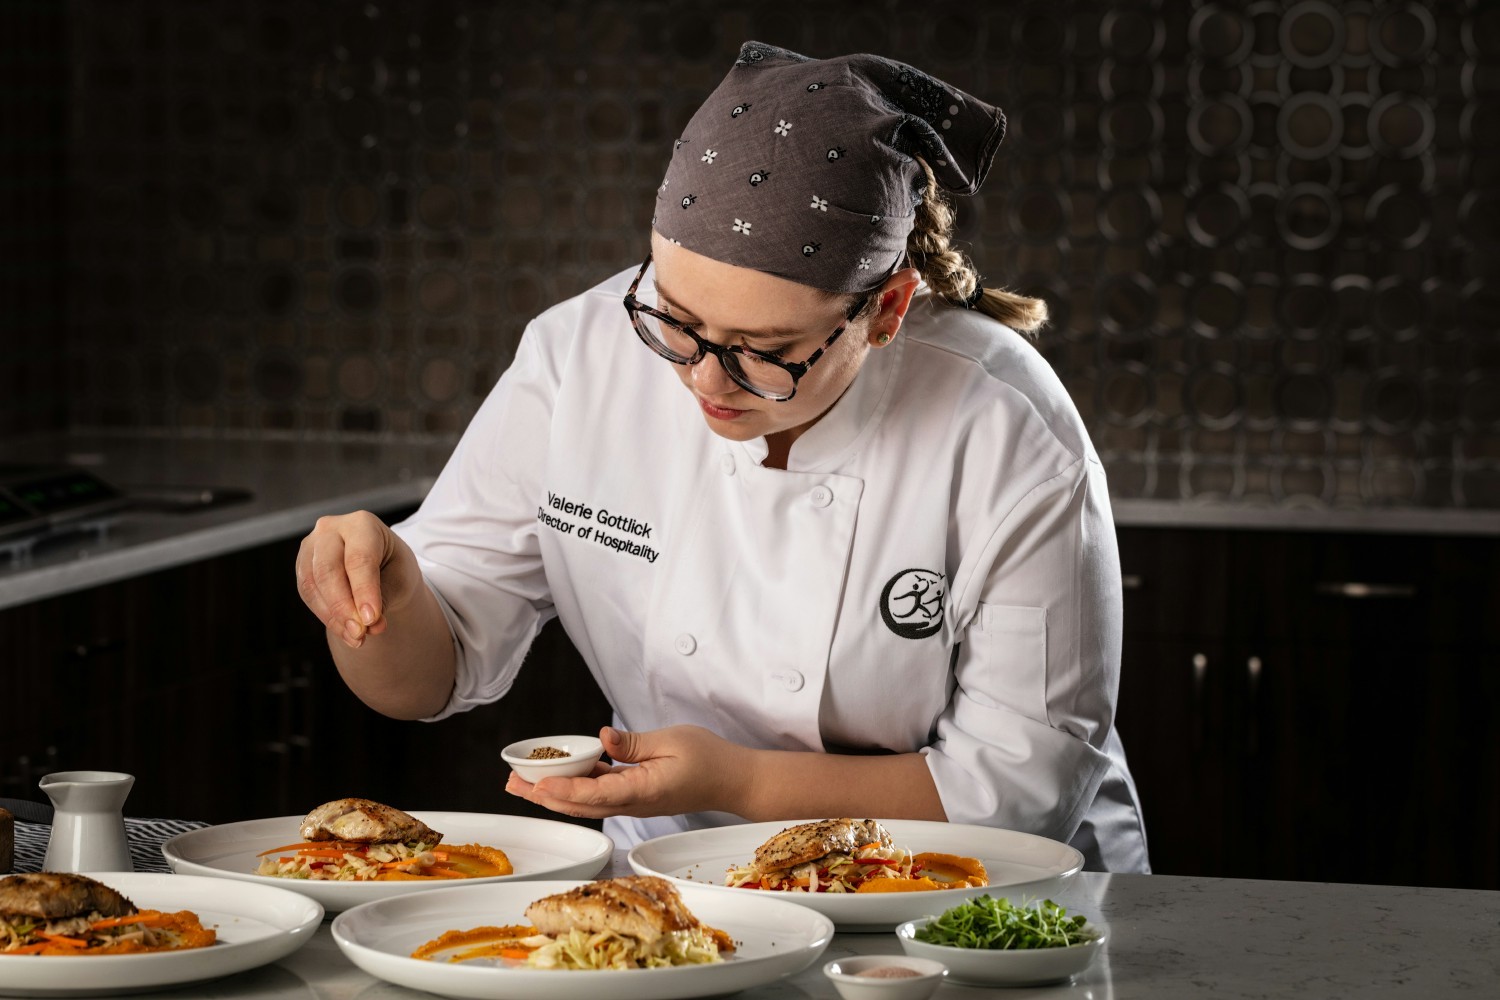 Chef Valerie Gottlick featured in the Chefs Studio, plating one of her signature dishes.